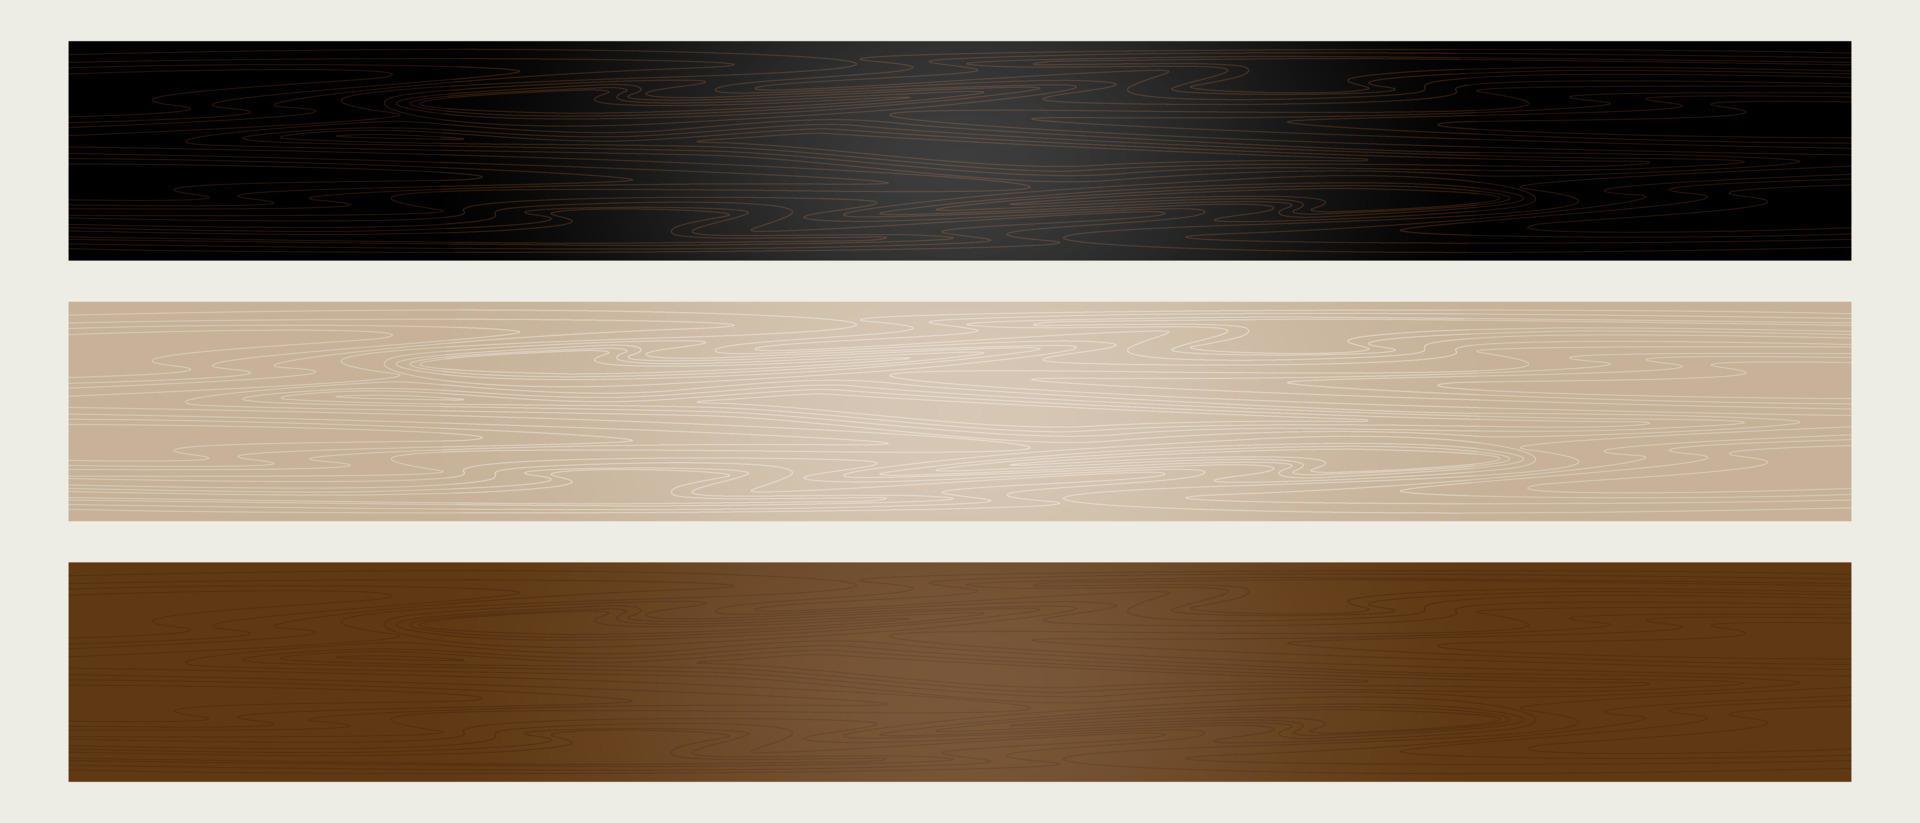 Wooden plank set, horizontal plank, light and dark brown wood planks, blank wooden plank for signboard decoration. vector